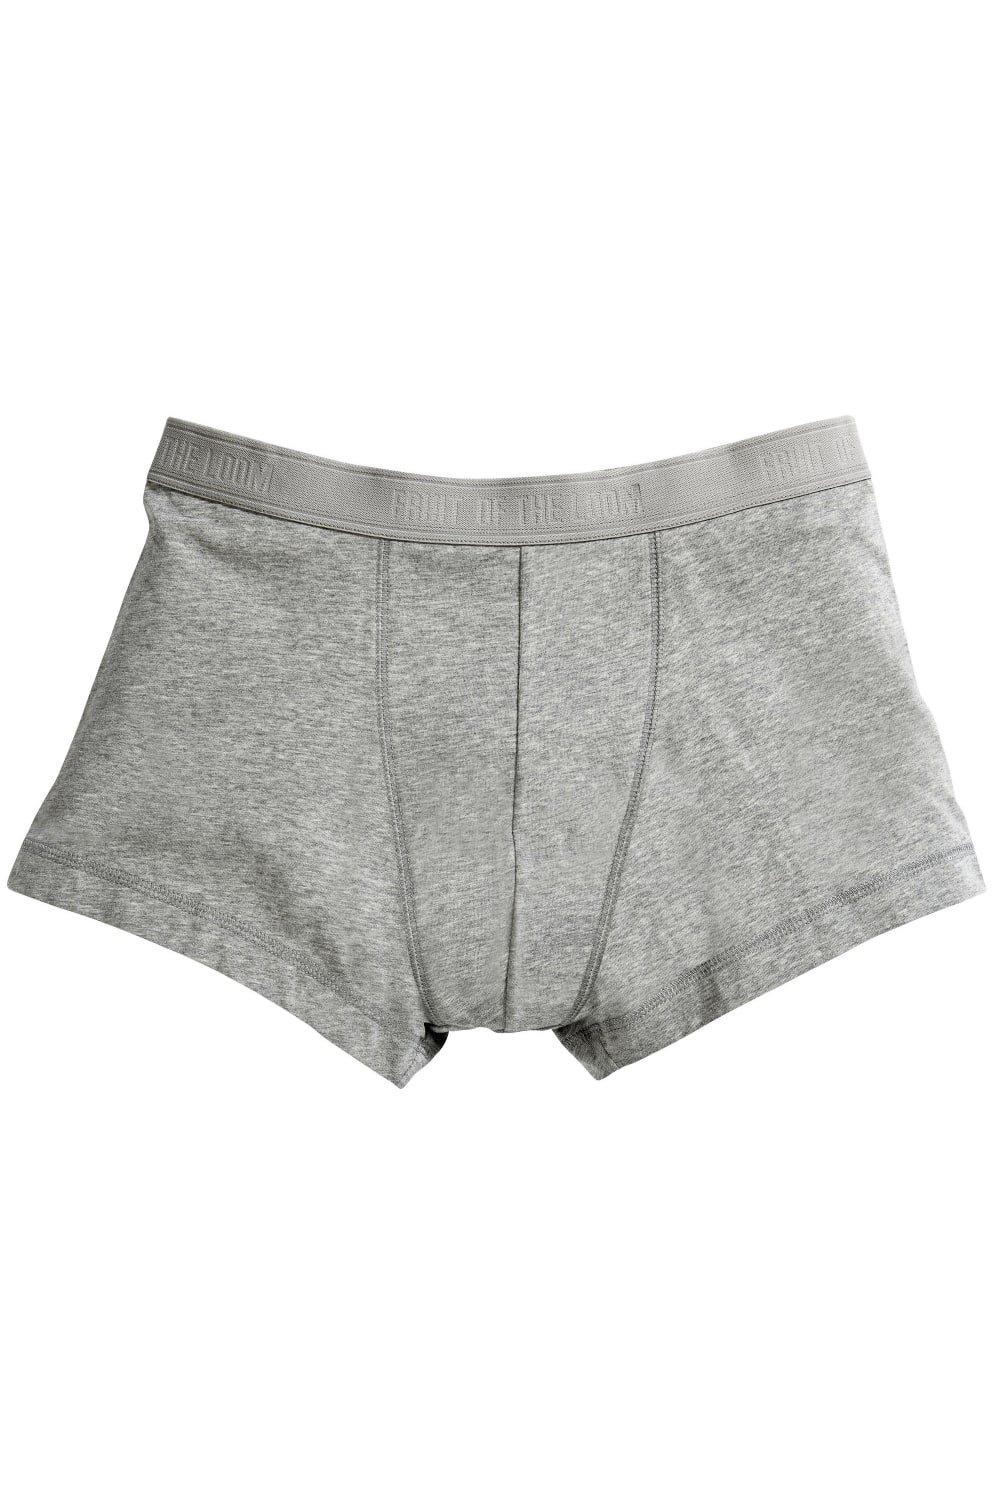 Classic Shorty Cotton Rich Boxer Shorts (Pack Of 2)